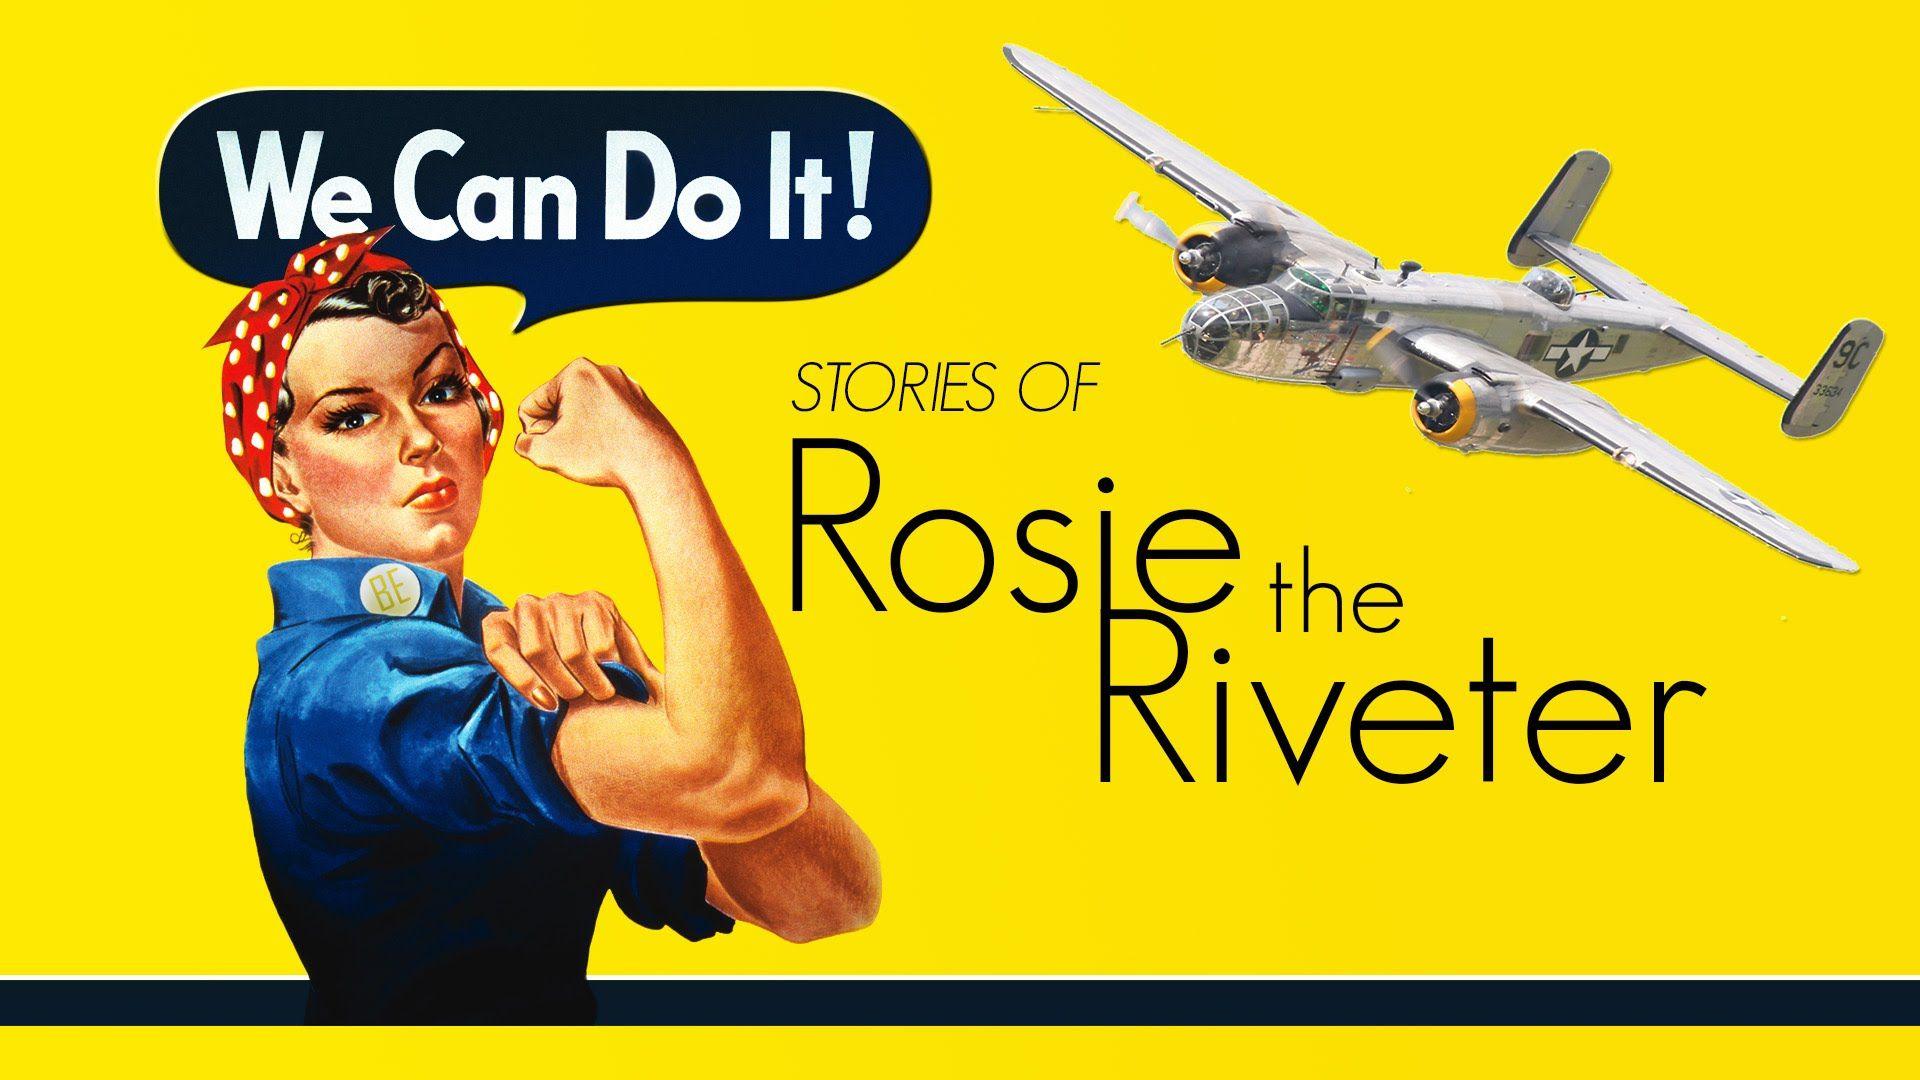 We can do a lot. Плакат «we can do it! ». Пин ап we can do it. Rosie the Riveter. We can do it СССР.